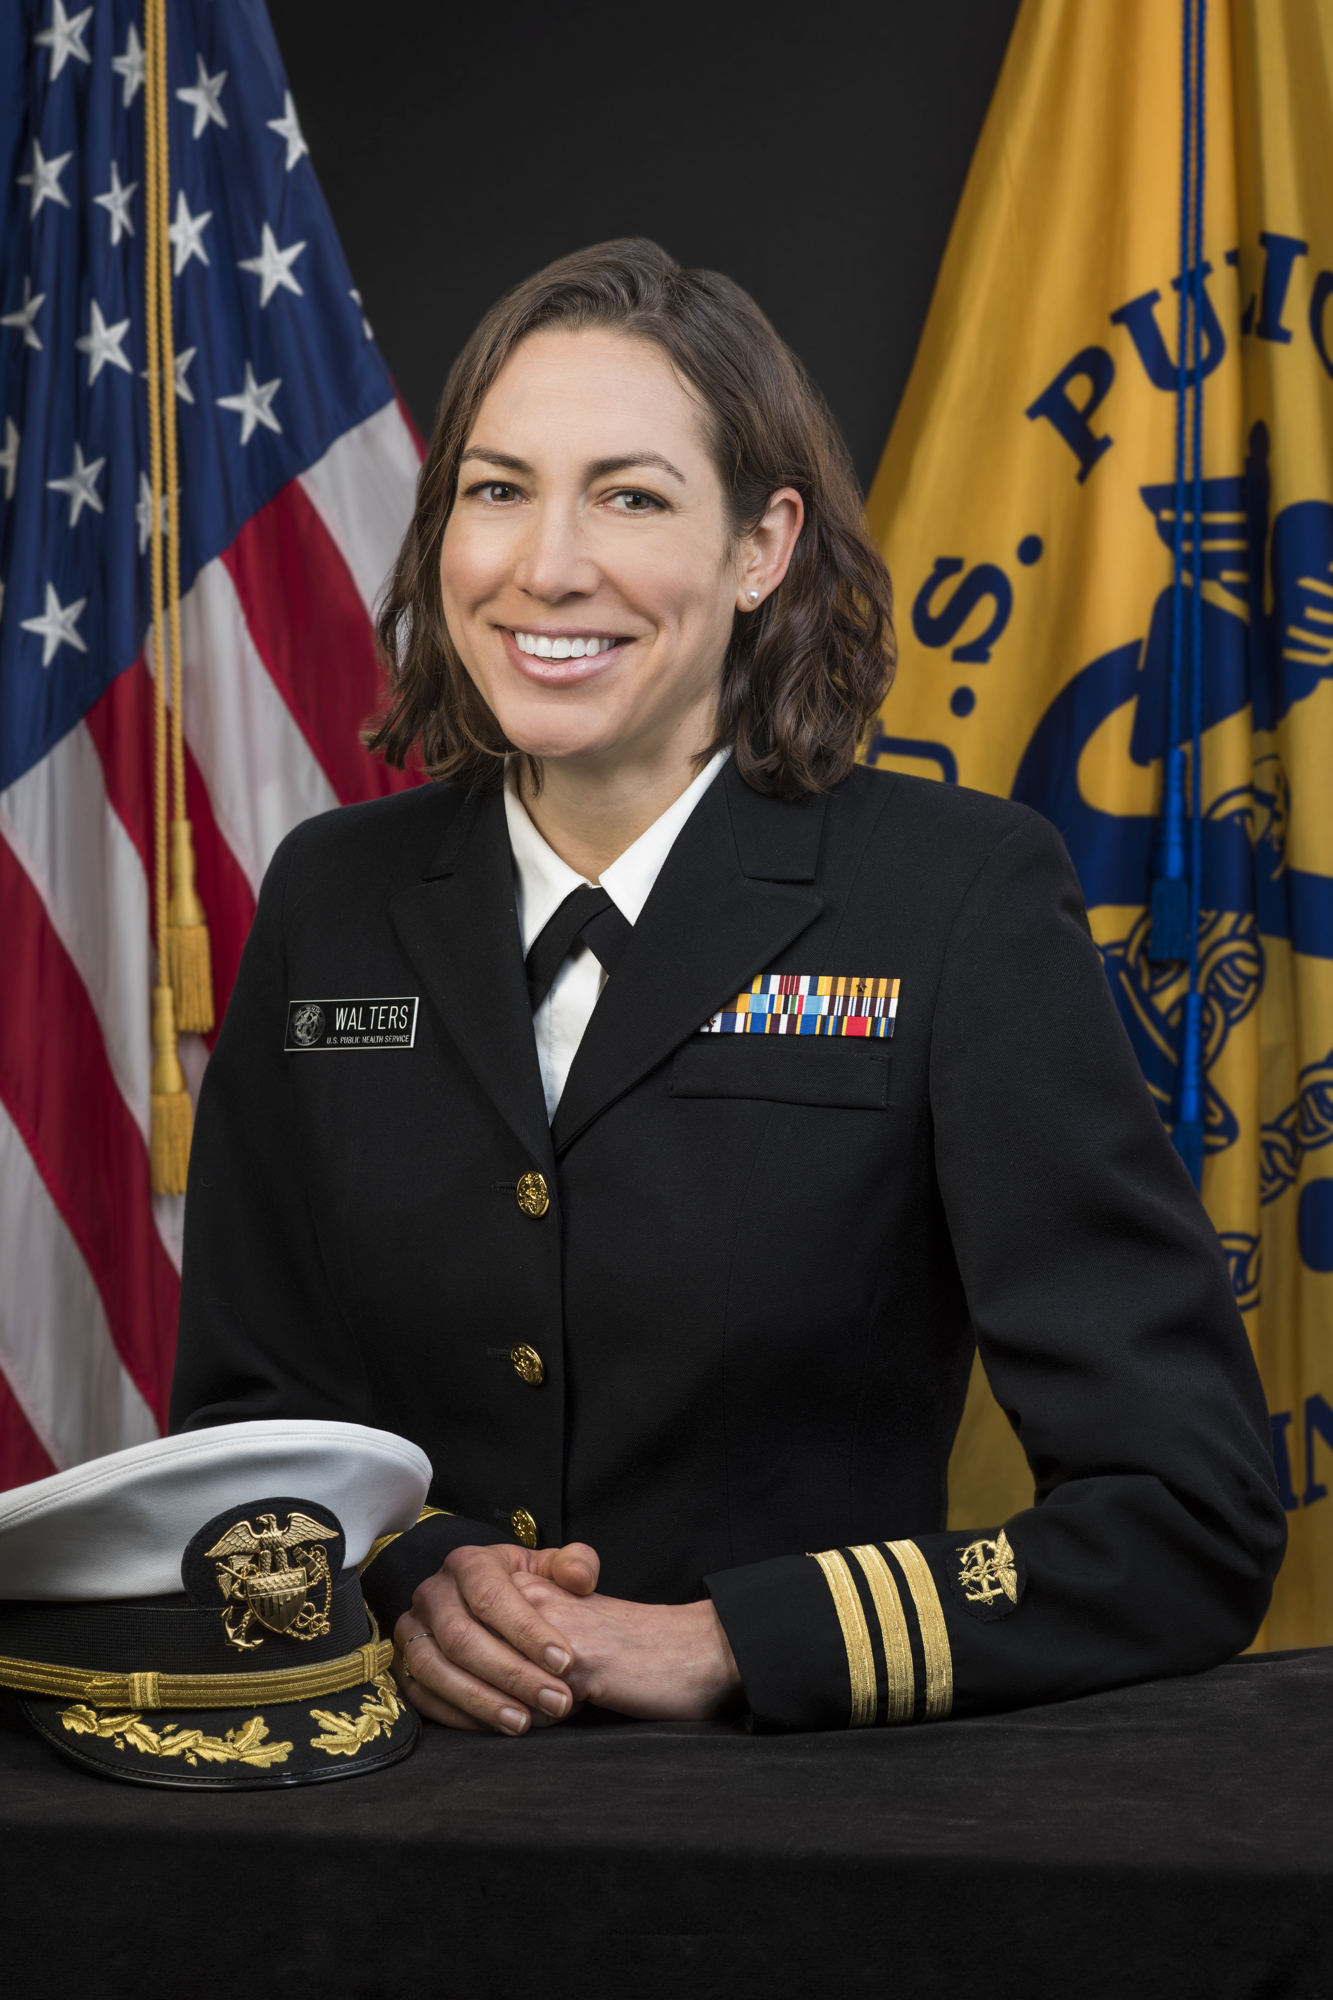 Image of Dr. Maroya Walters of the CDC.